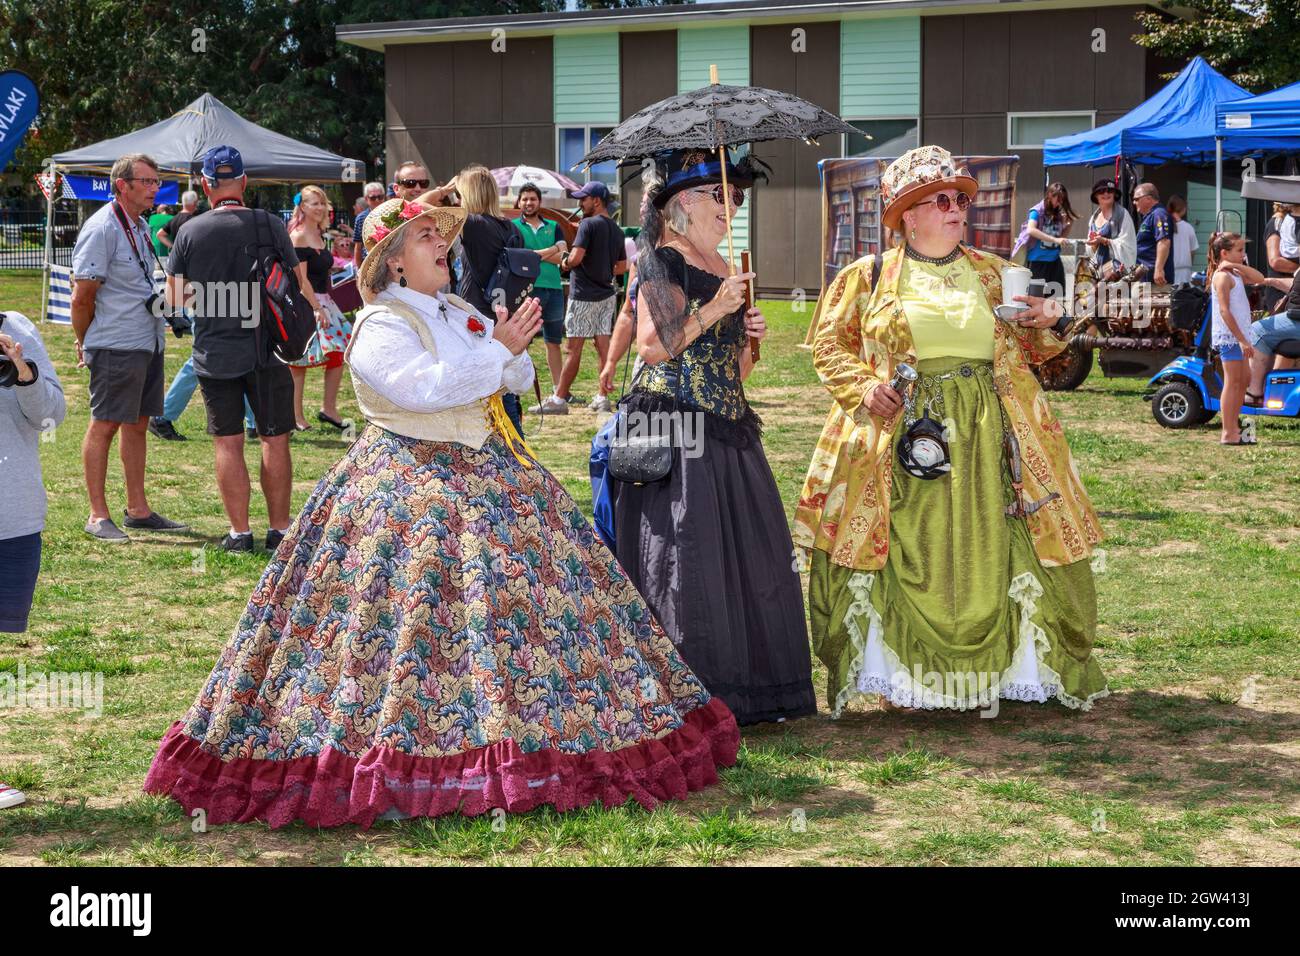 Women dressed in elaborate Victorian style clothing at a steampunk festival Stock Photo